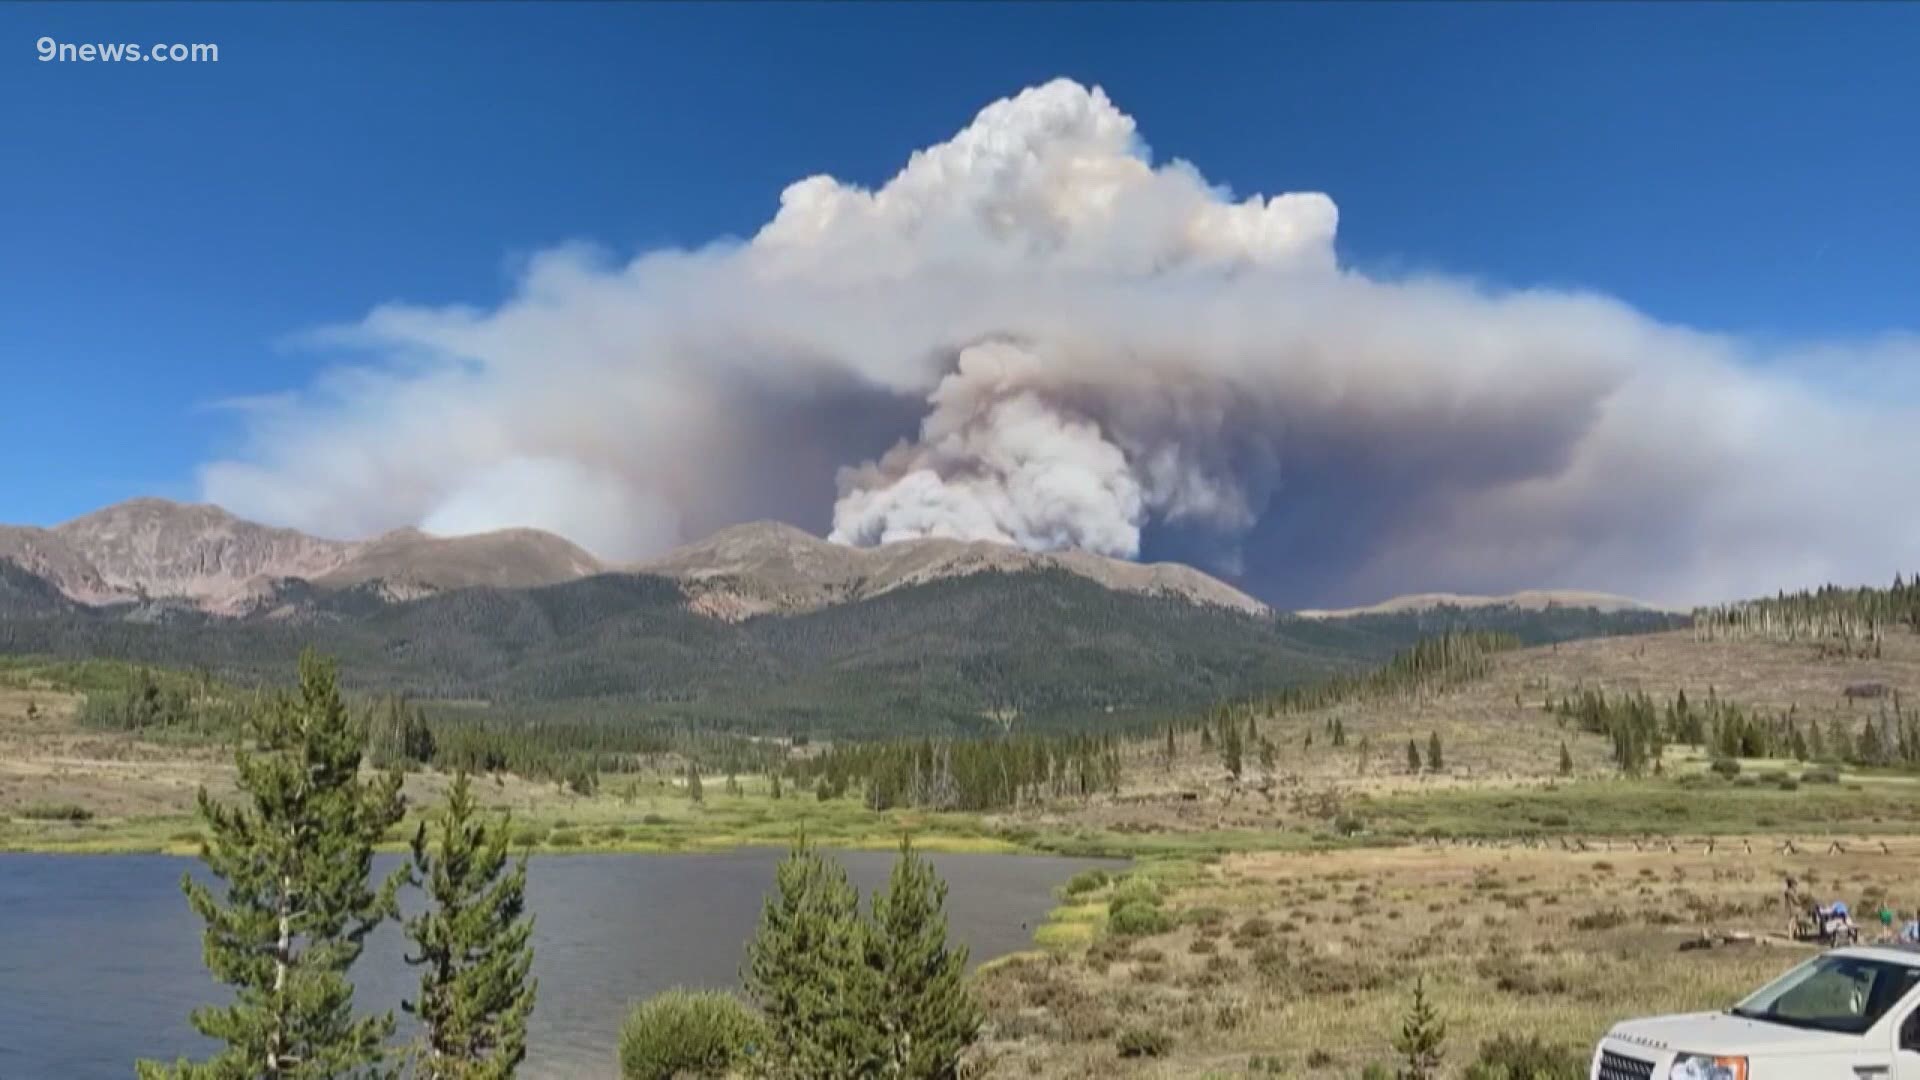 Colorado's wildfires have spread embers flying over the Continental Divide landing on the other side, starting spot fires as far as 30 miles away.